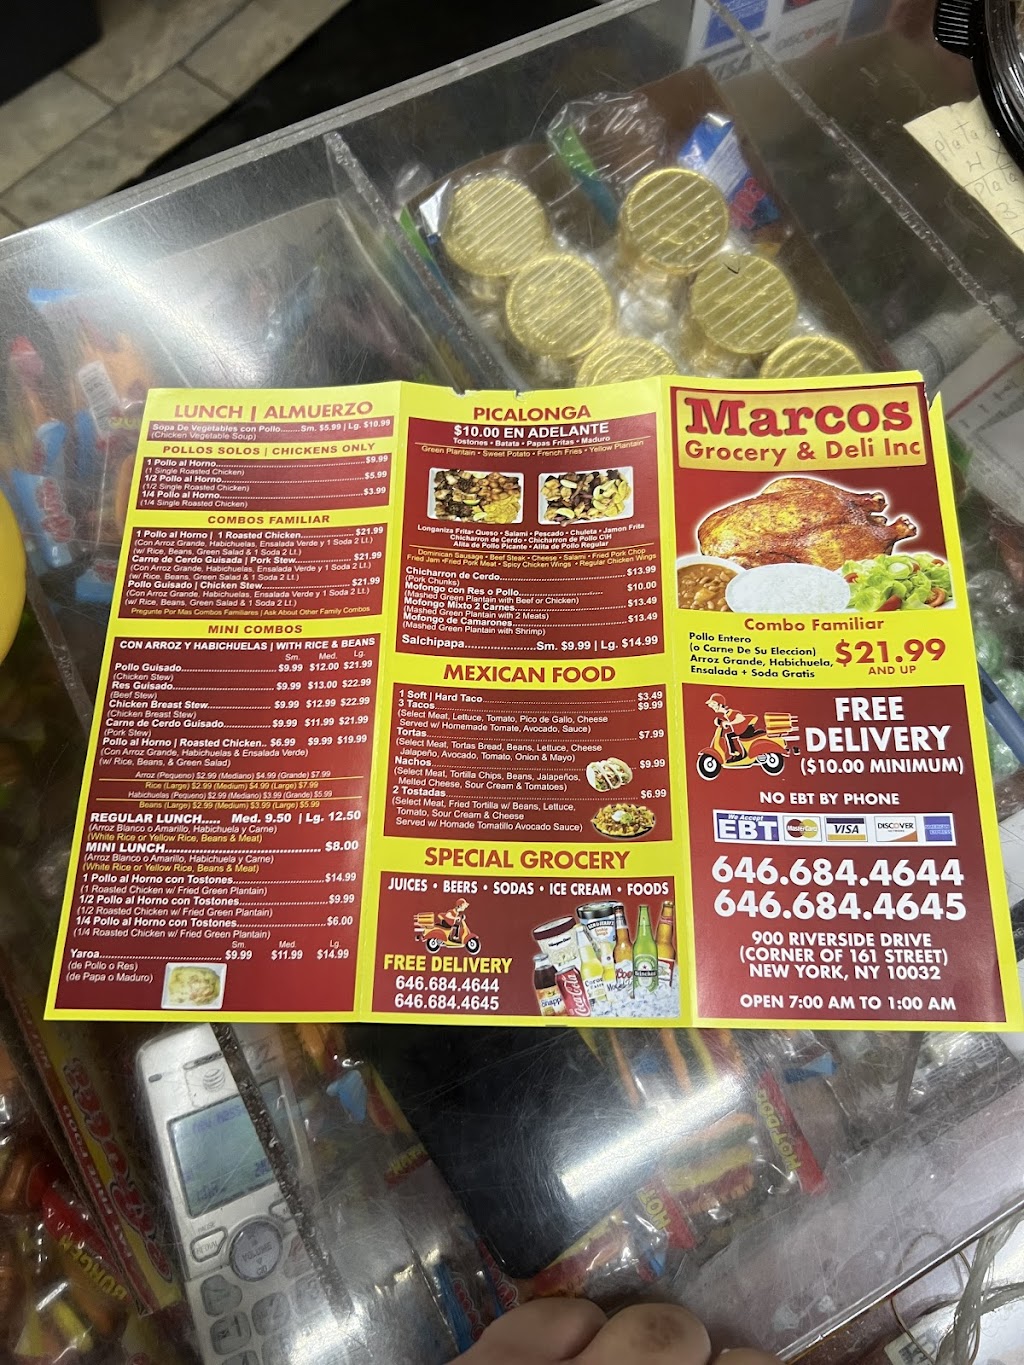 Marcos Grocery & Deli | 900 Riverside Dr, New York, NY 10032 | Phone: (646) 684-4645